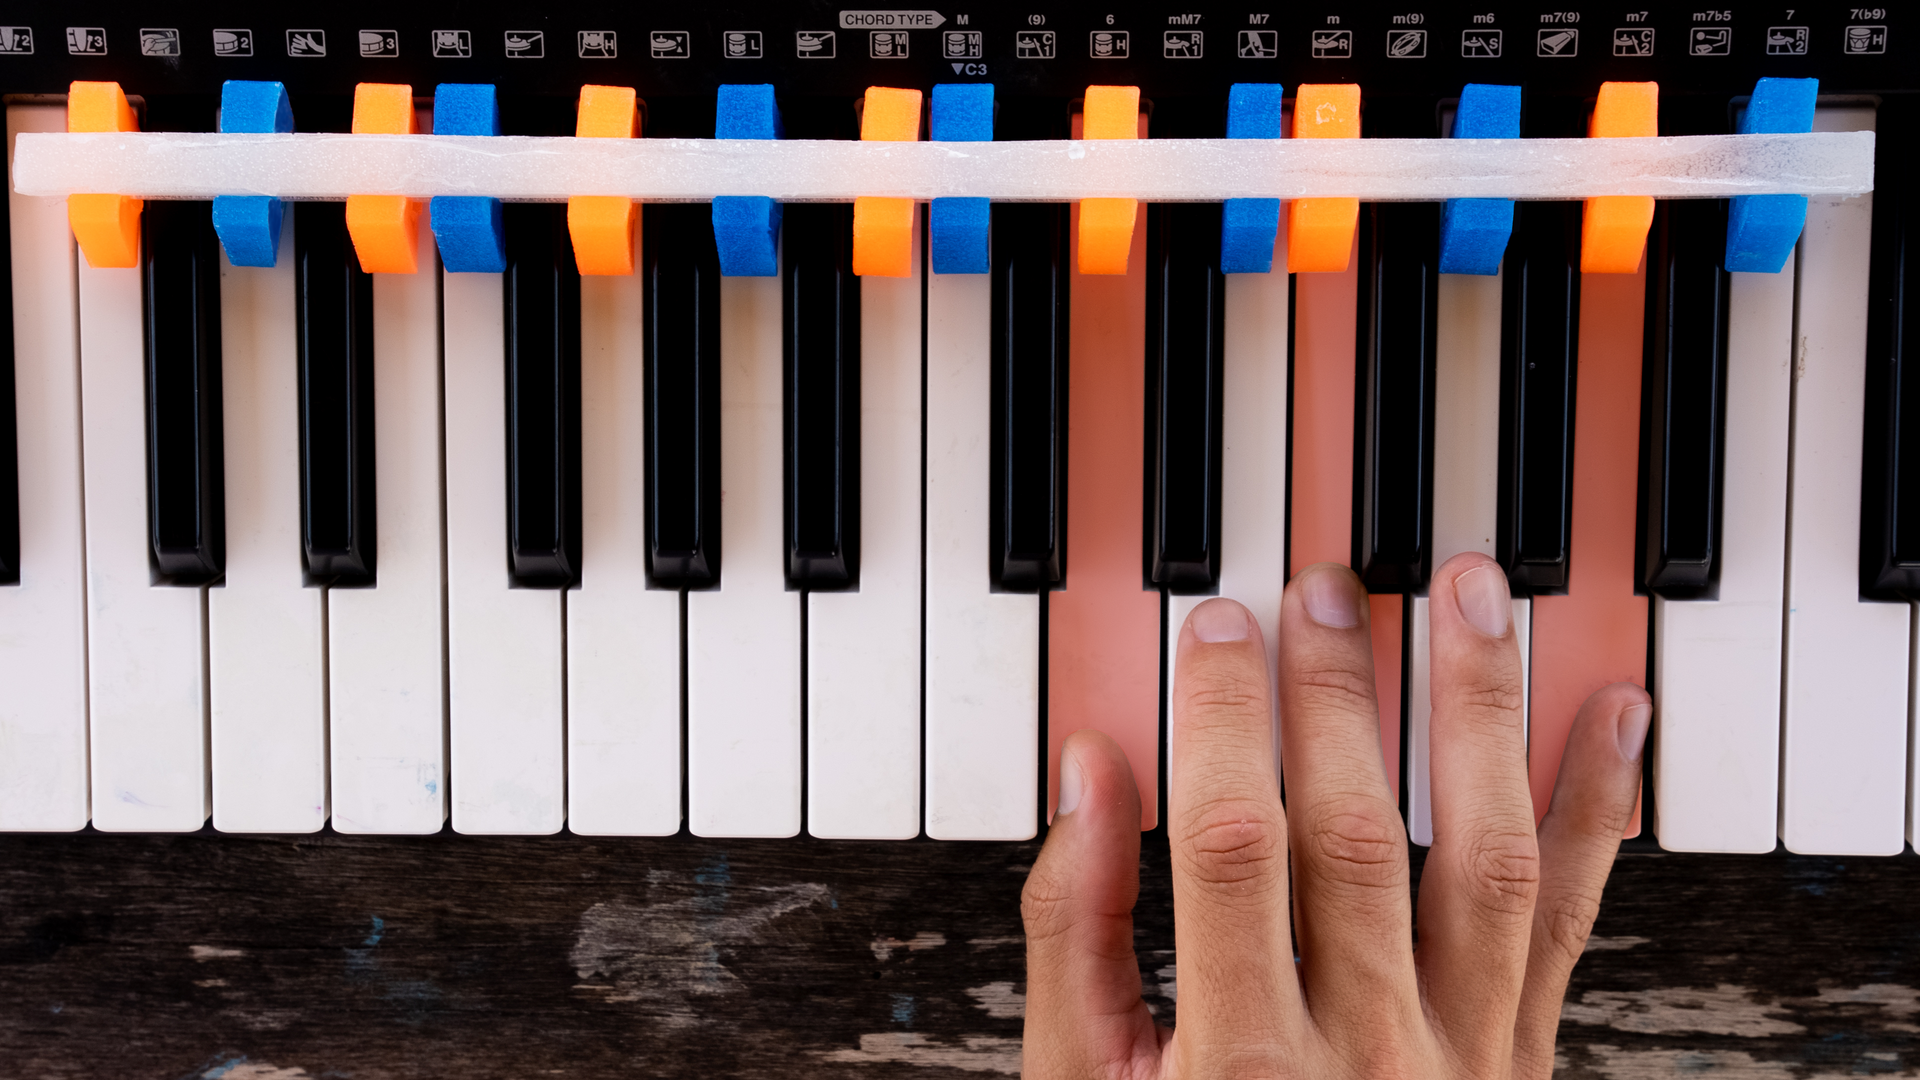 Load video: Making your own music on the piano with the improkeys